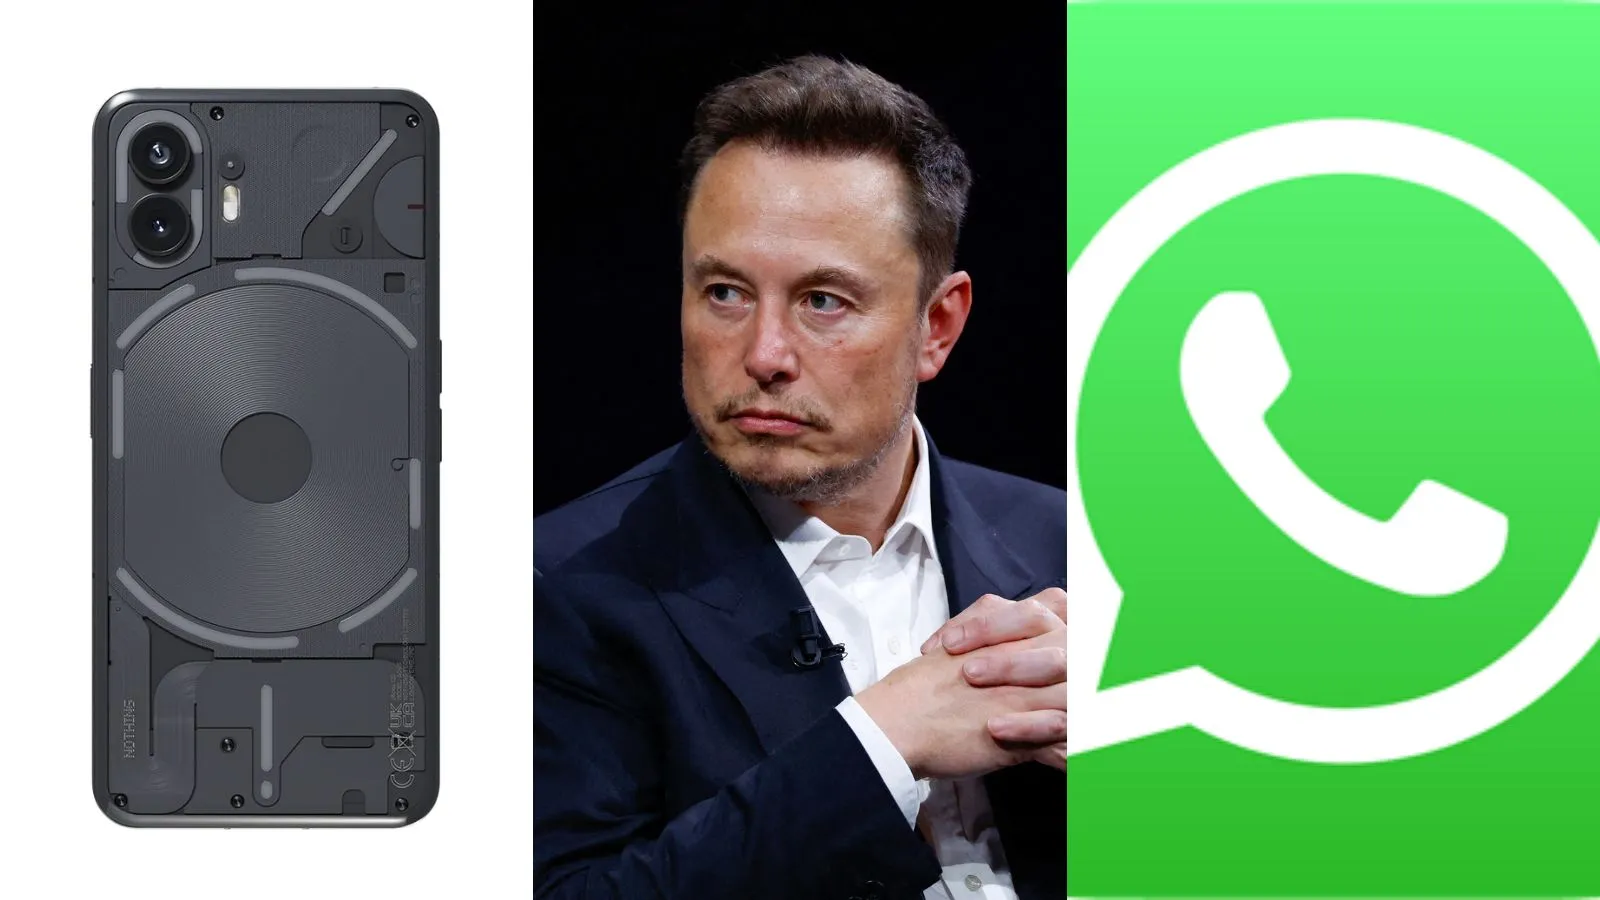 Tech News Today: Nothing Phone 2 price slashed permanently, Elon Musk asks advertisers to buzz off - The Indian Express